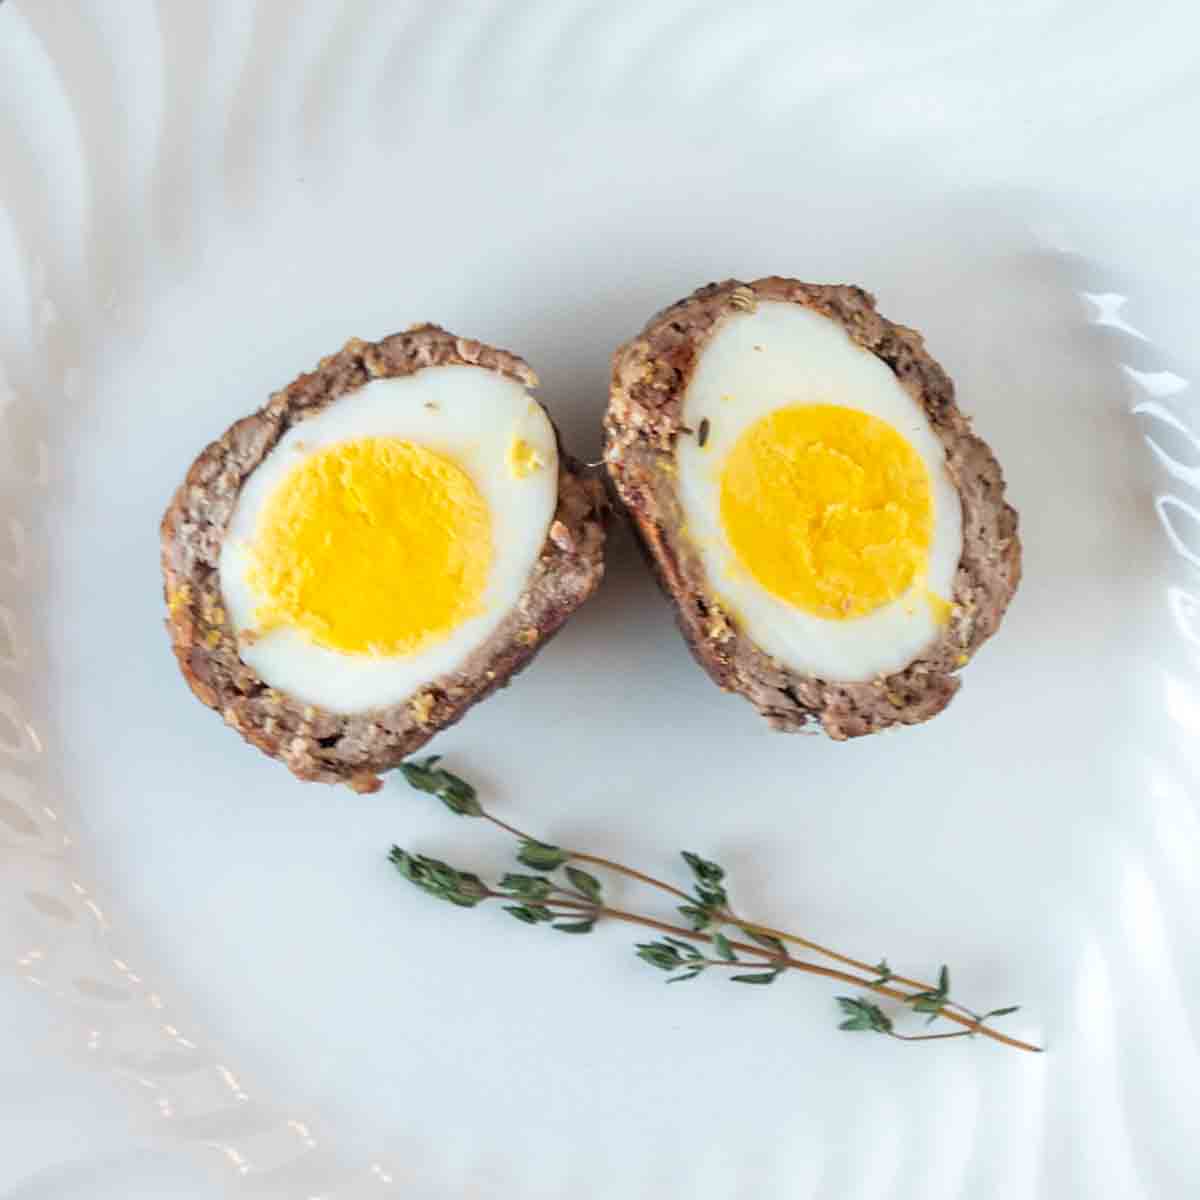 Scotch Eggs Recipe (the Best, Easiest Guide)